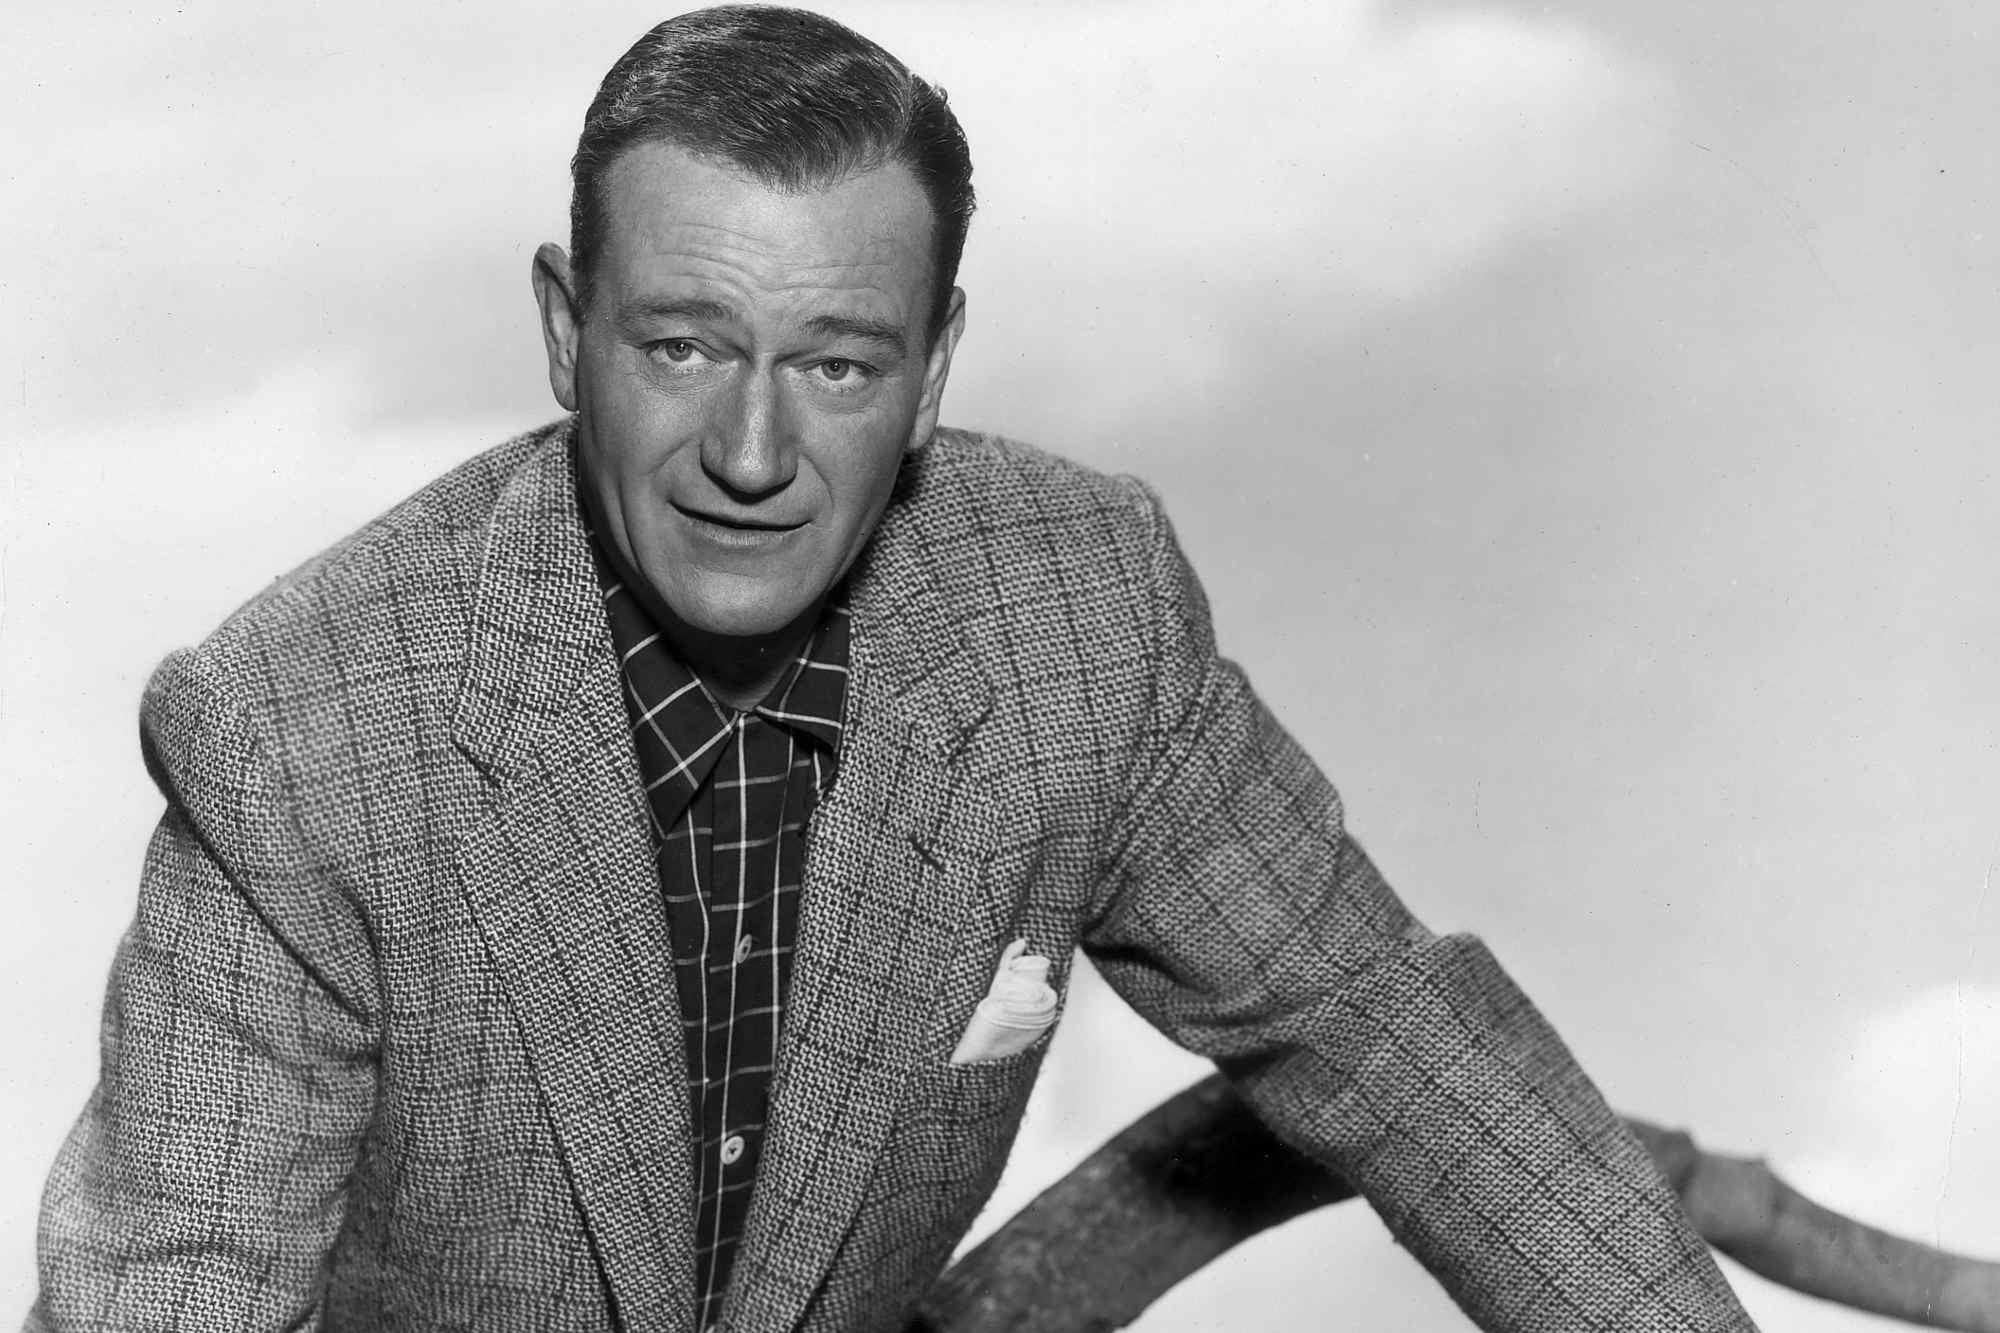 Movie star John Wayne wearing a suit with a slight smile on his face